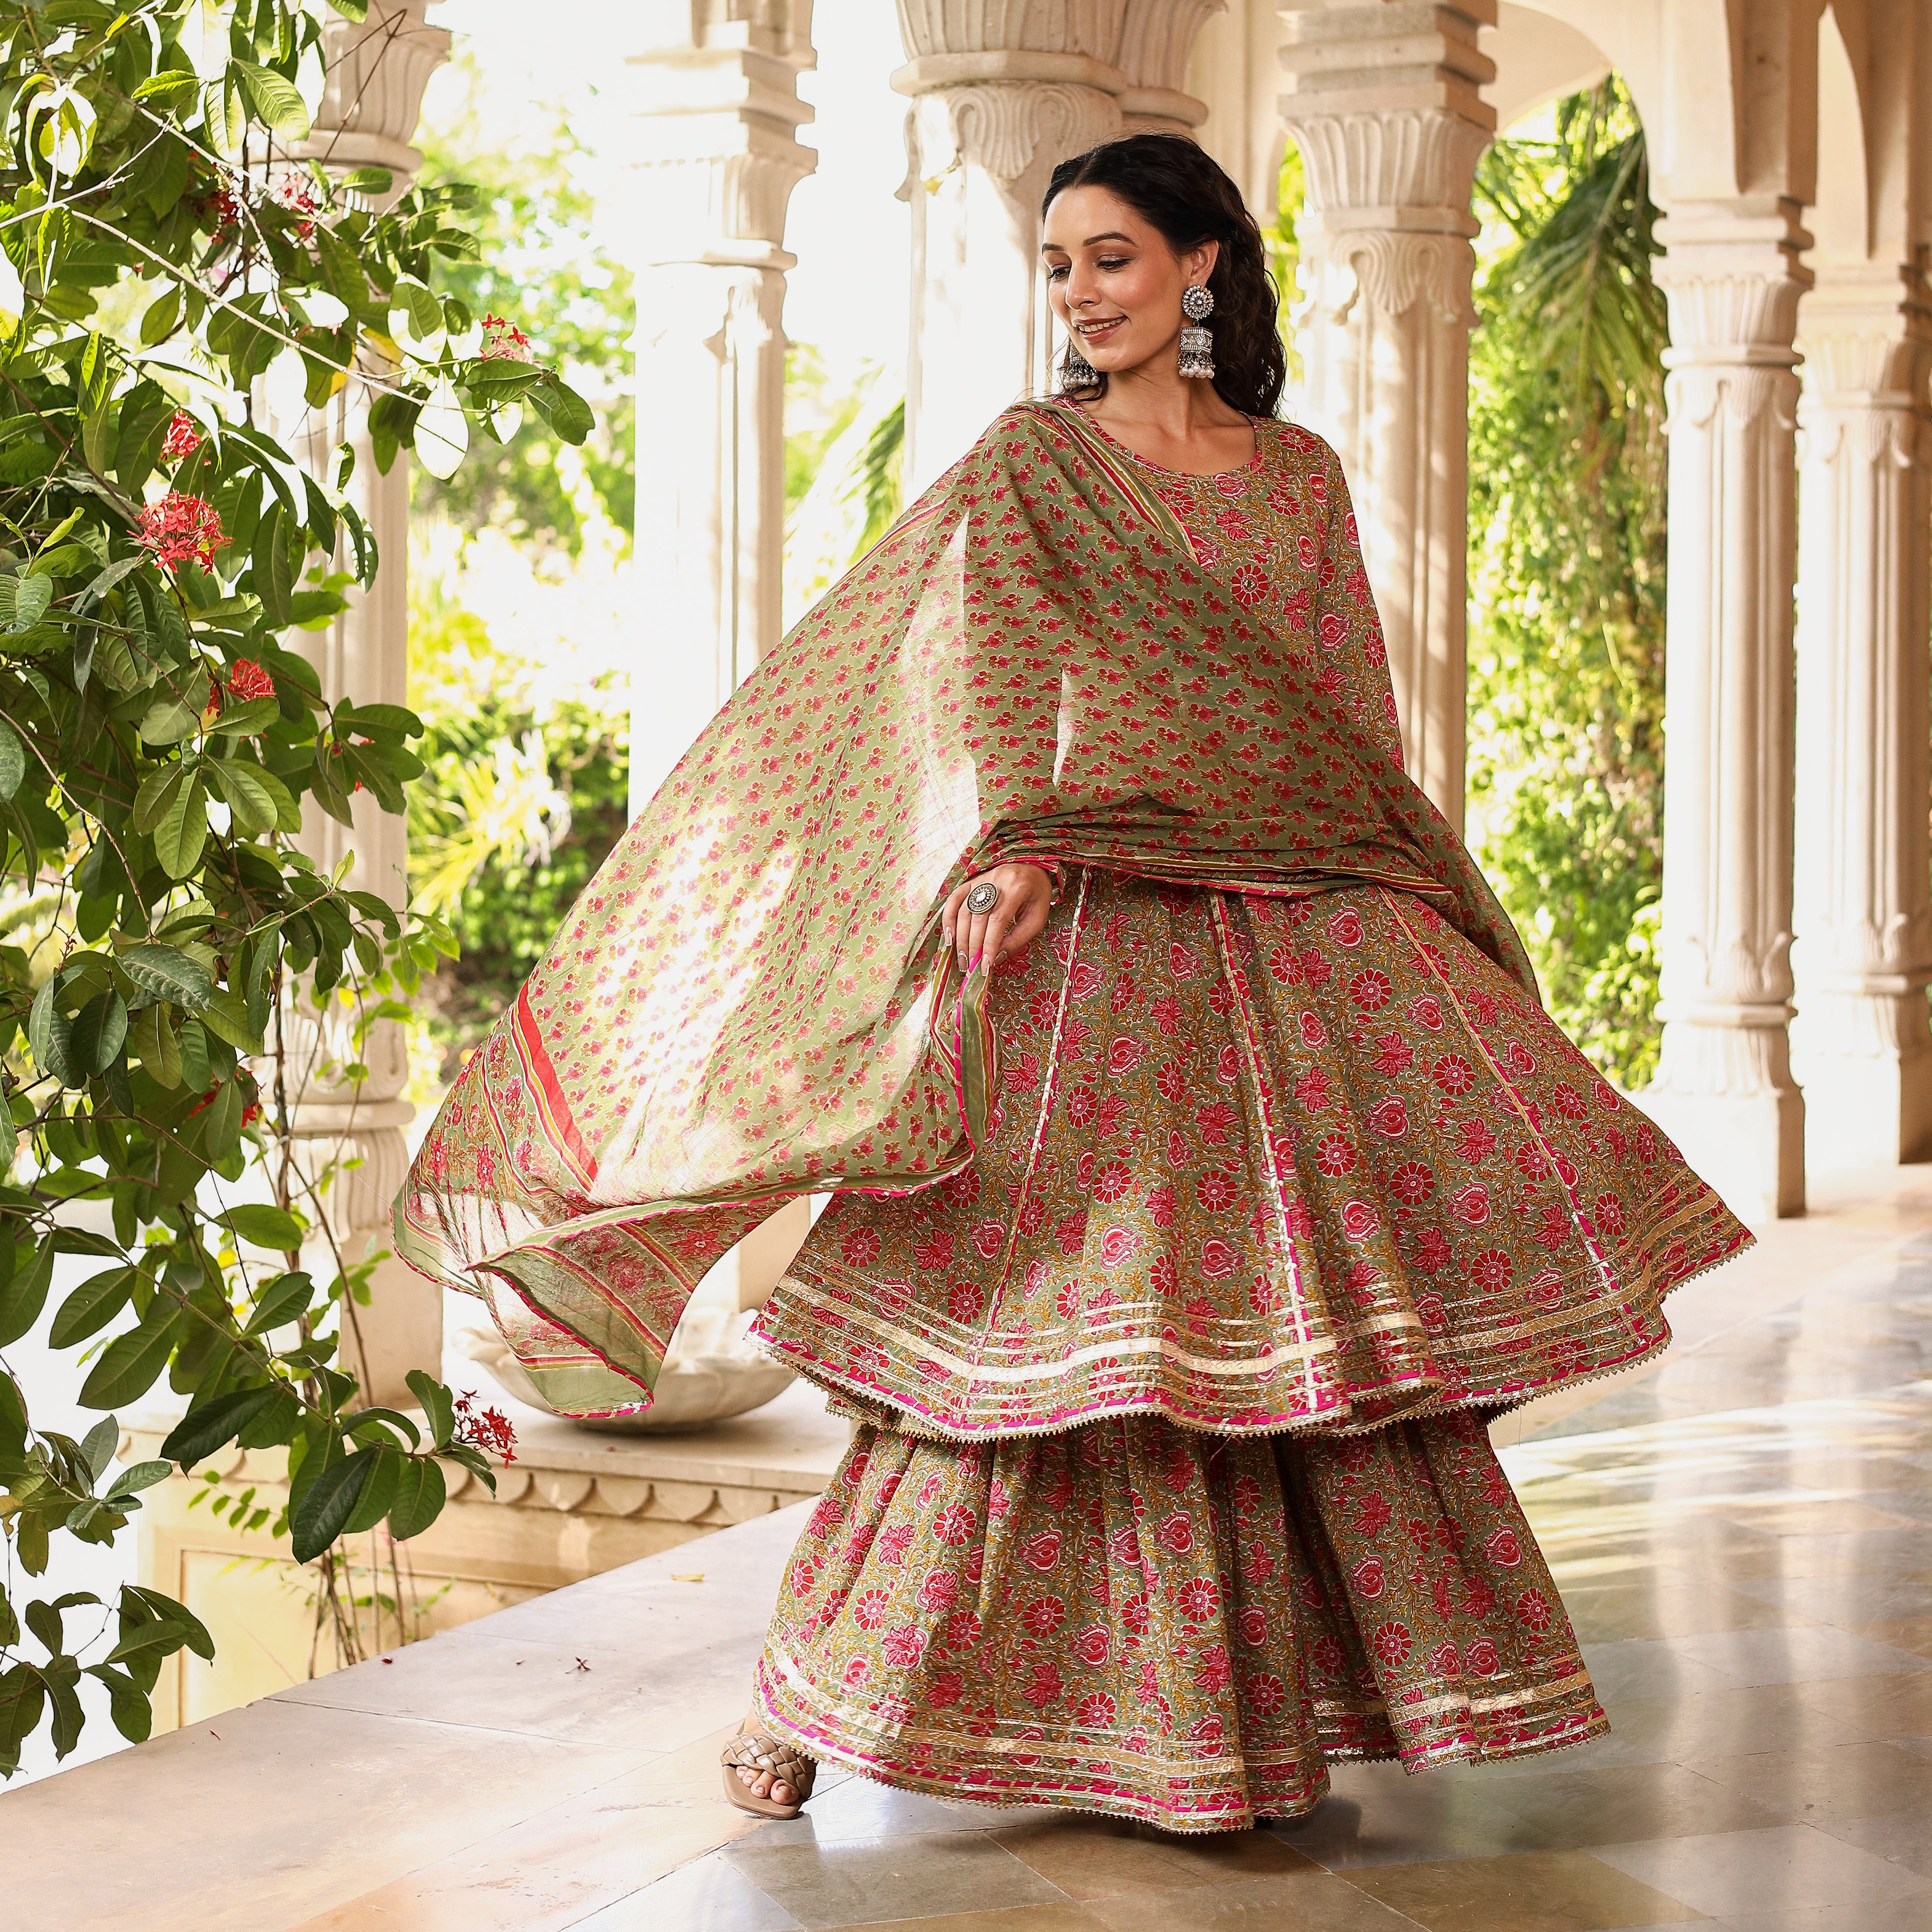 What should the hairstyle be when wearing lengha? - Quora